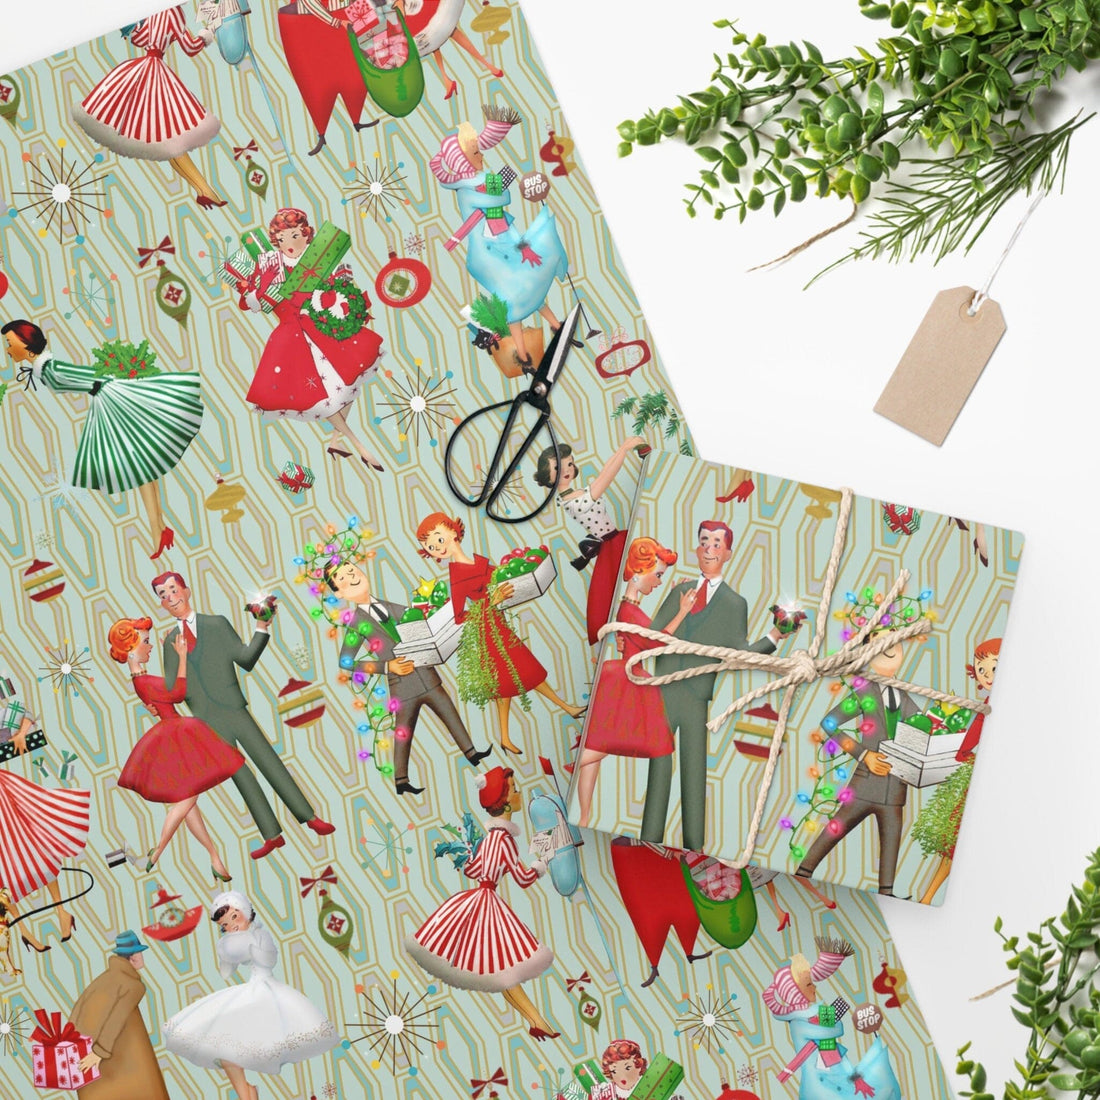 Kate McEnroe New York 1950s Retro Vintage Christmas Wrapping Paper, Mid Century Modern Retro Green, Red, Women, Ladies, Housewives Holiday Gift Wrap Seasonal &amp; Holiday Decorations